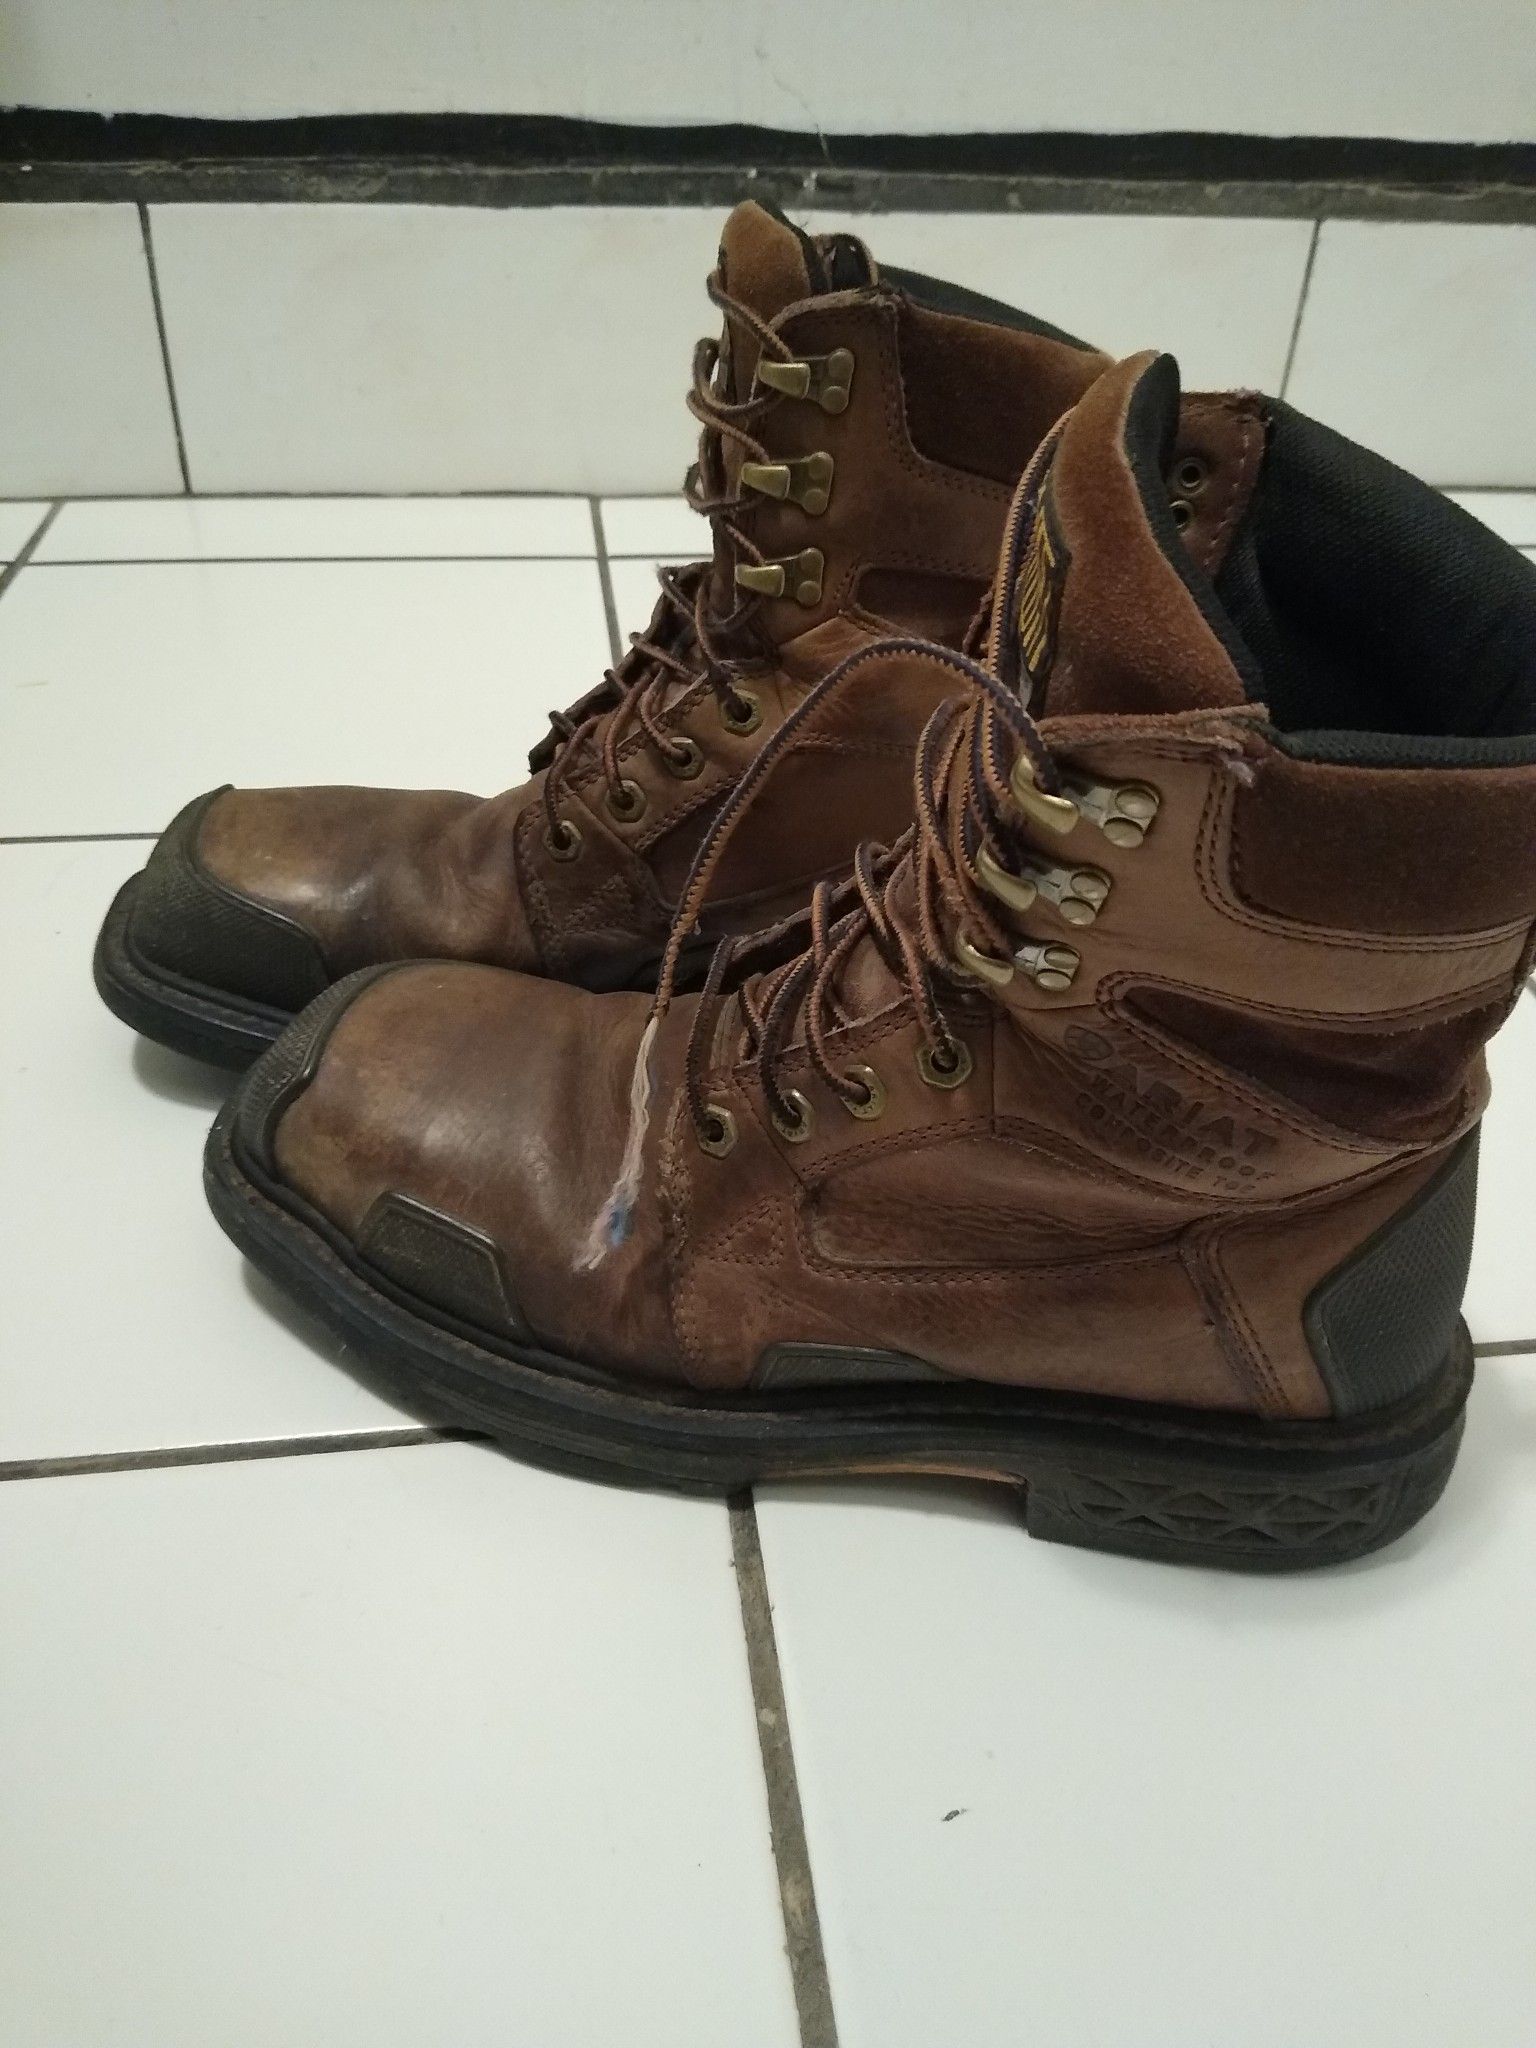 Ariat work boot going condition 8.1/2